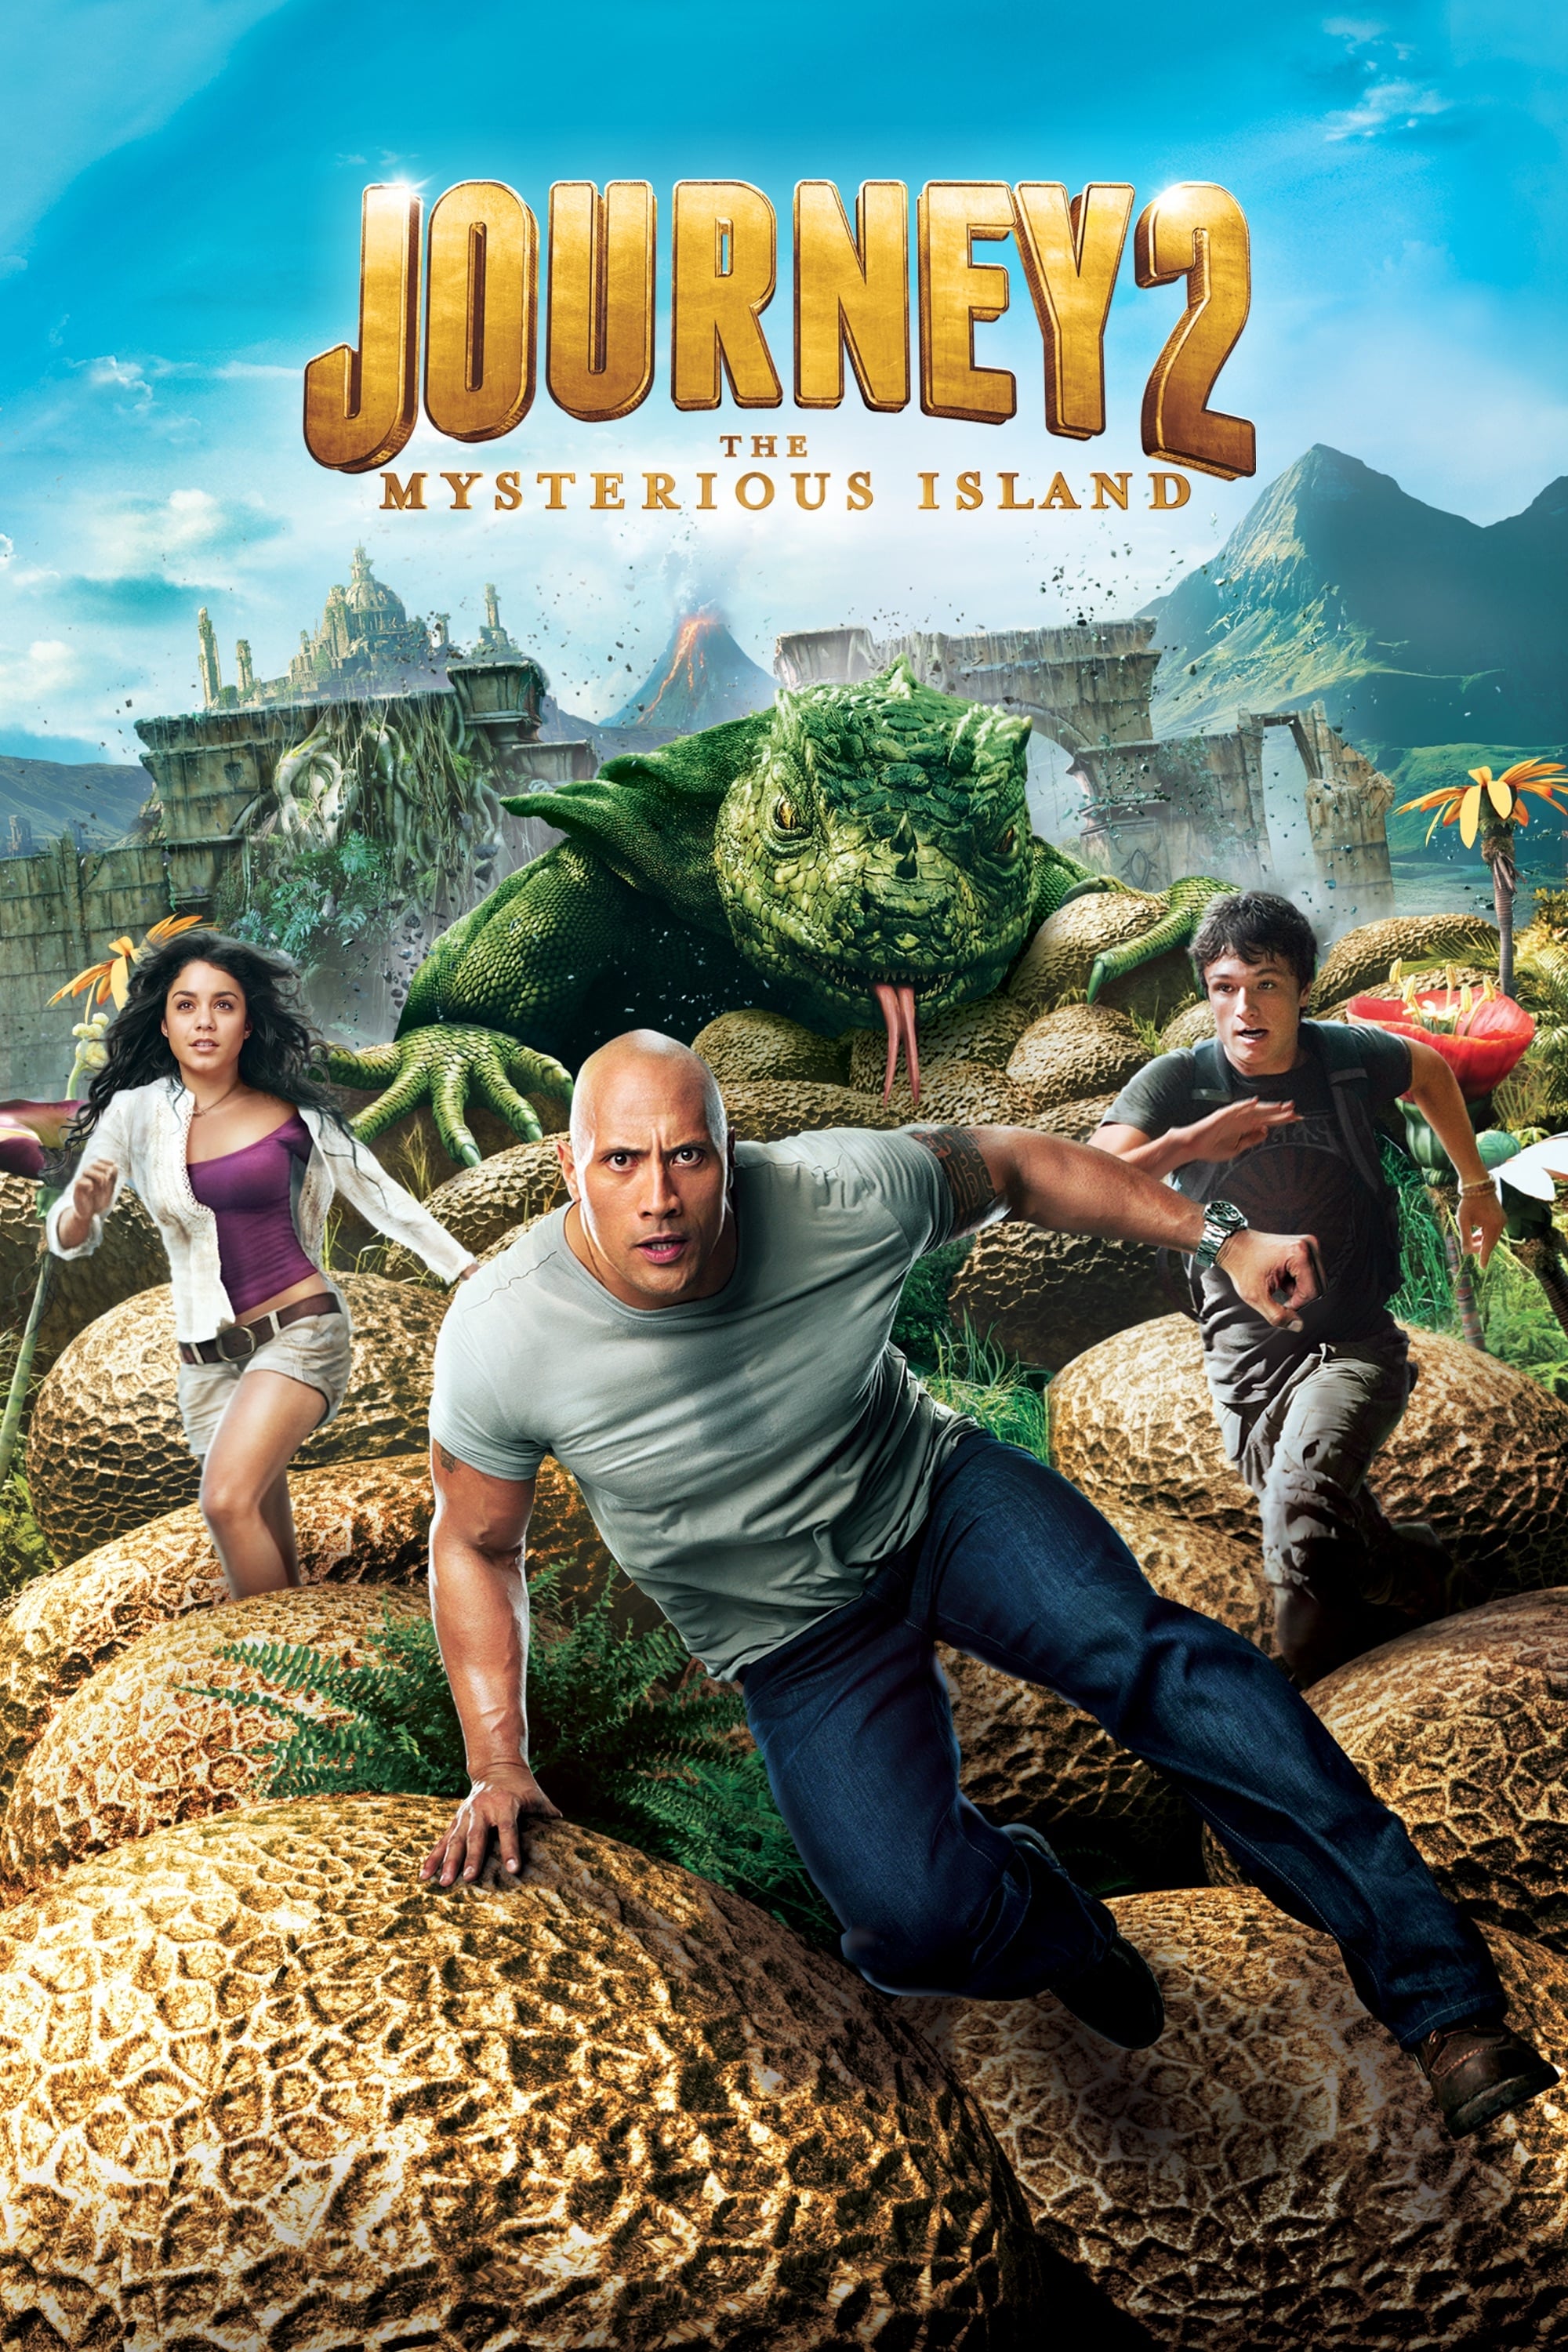 HBO FAMIILY: JOURNEY 2 THE MYSTERIOUS ISLAND